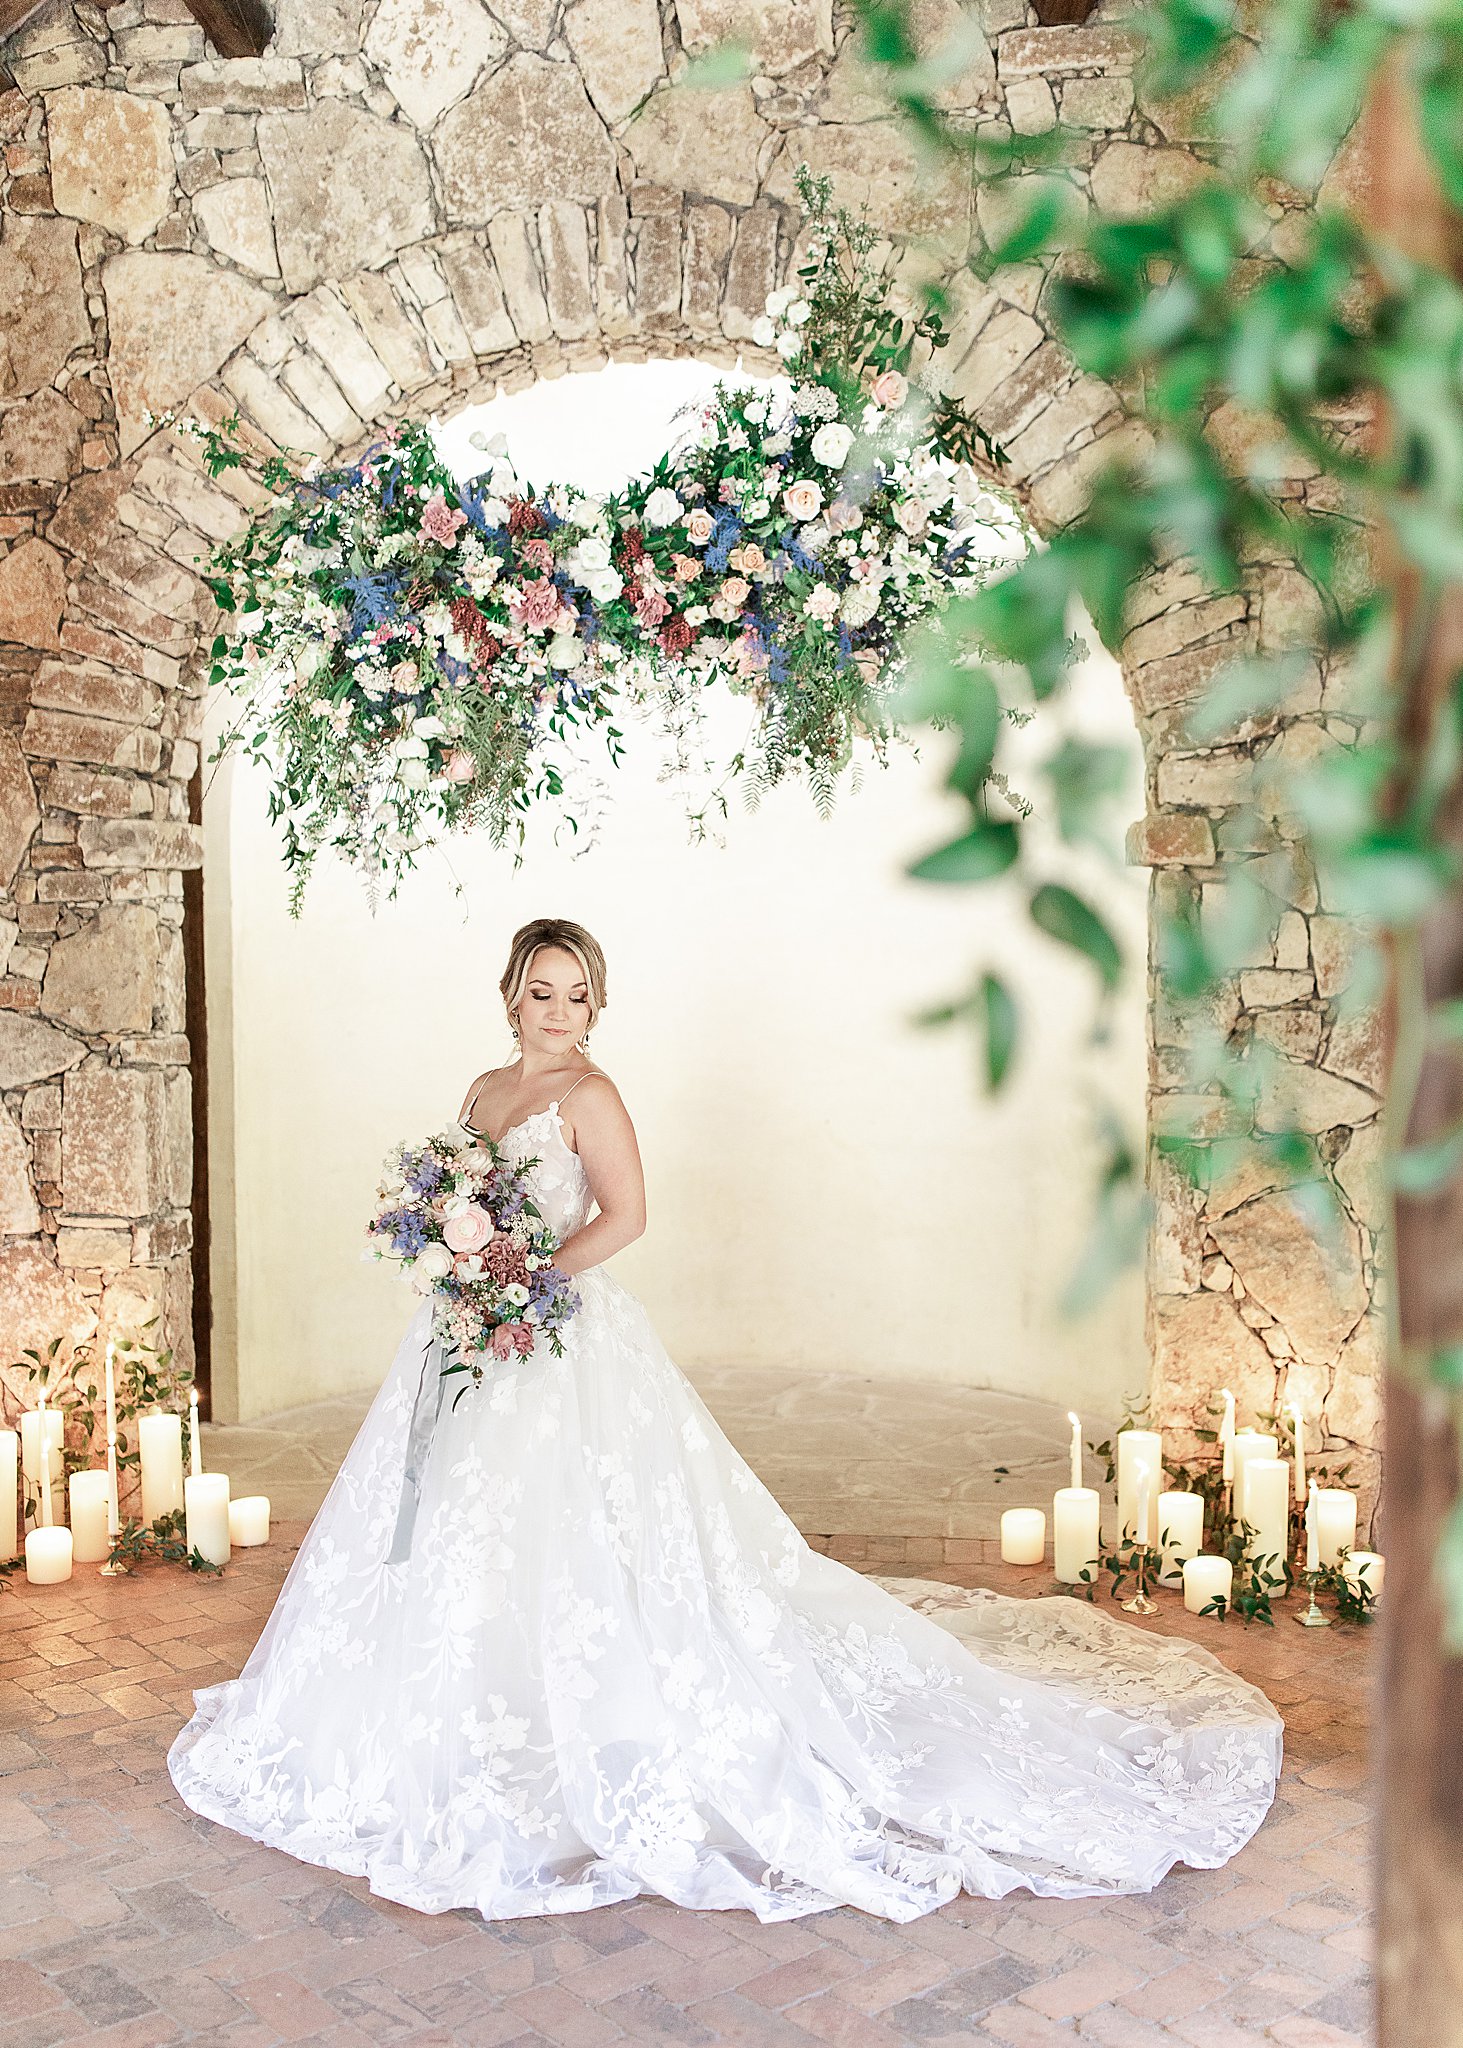 monique lhuillier bridal gown at Ian's Chapel at Camp Lucy archway with gorgeous floral installation